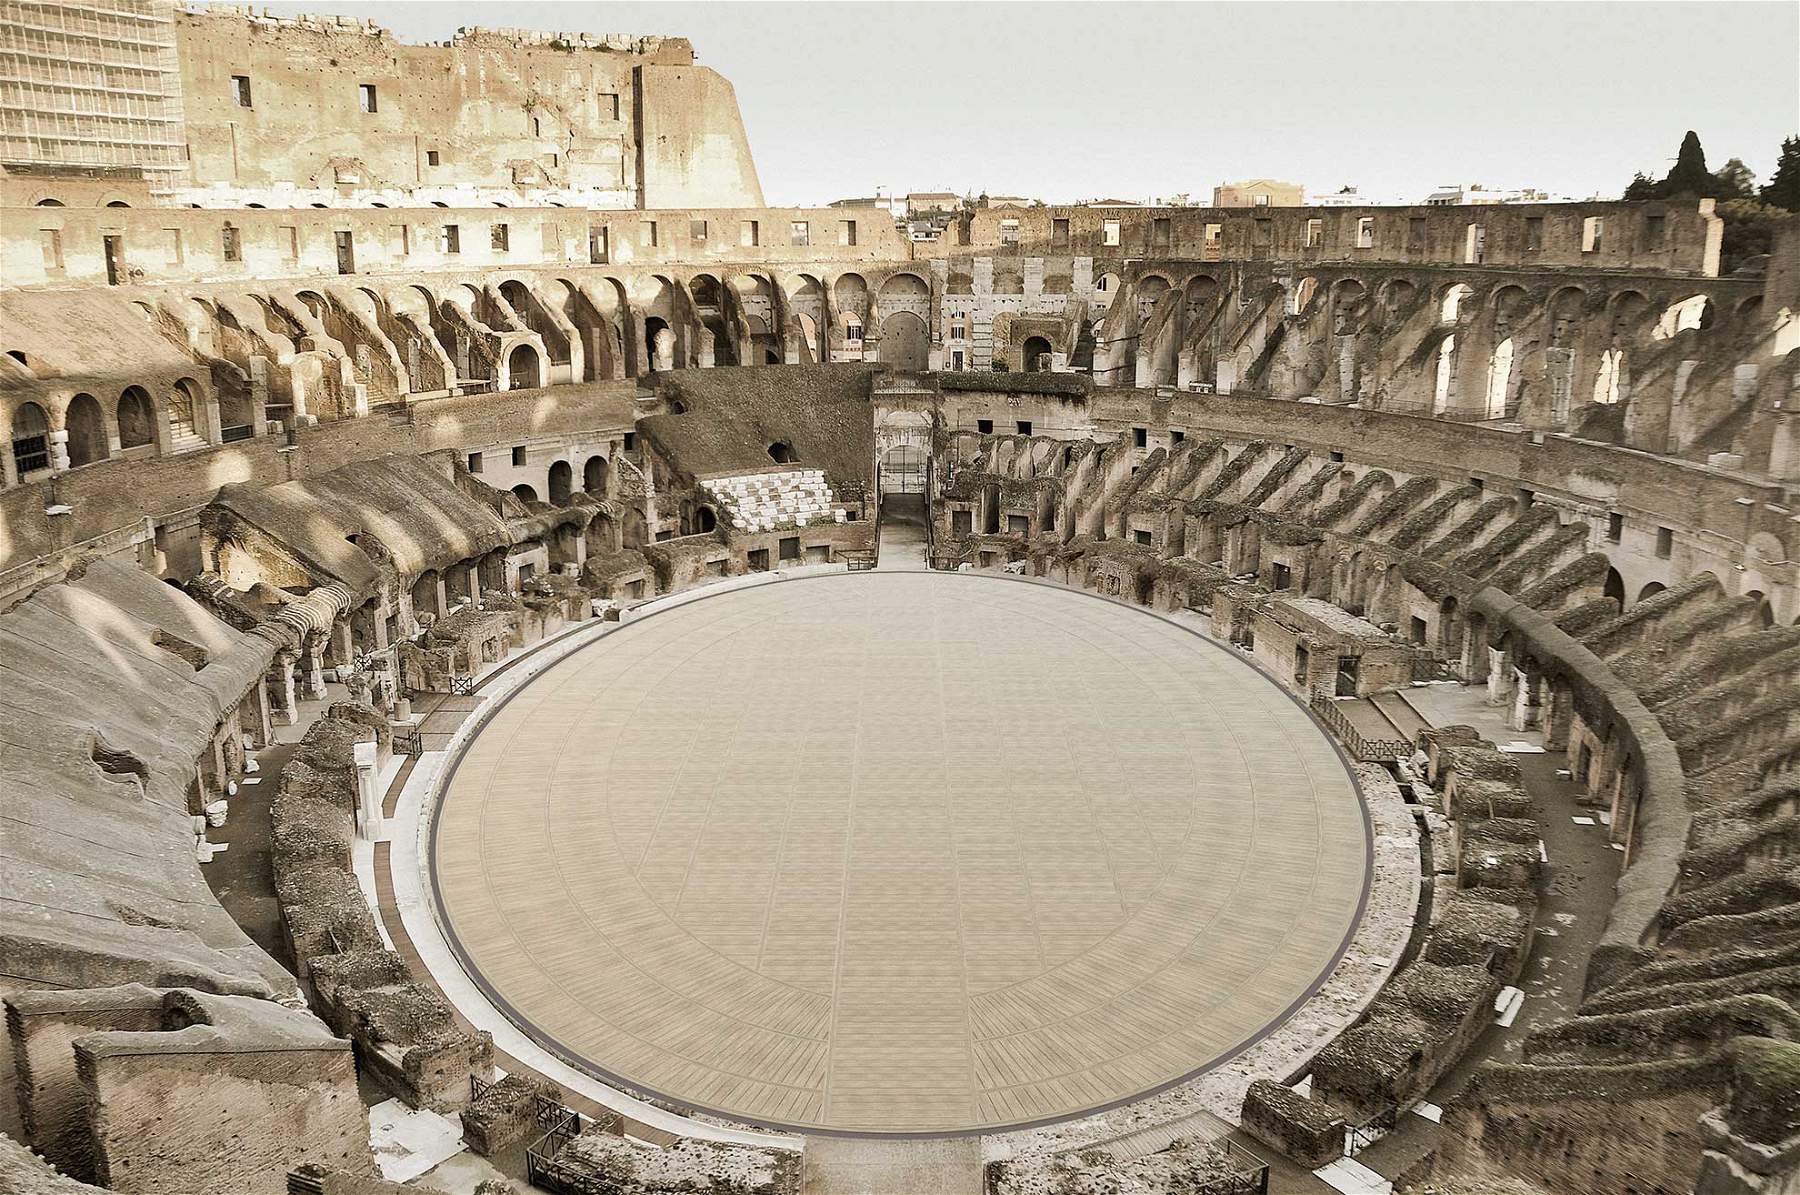 This is what the rebuilt Colosseum arena will look like. Design unveiled, ready in 2023